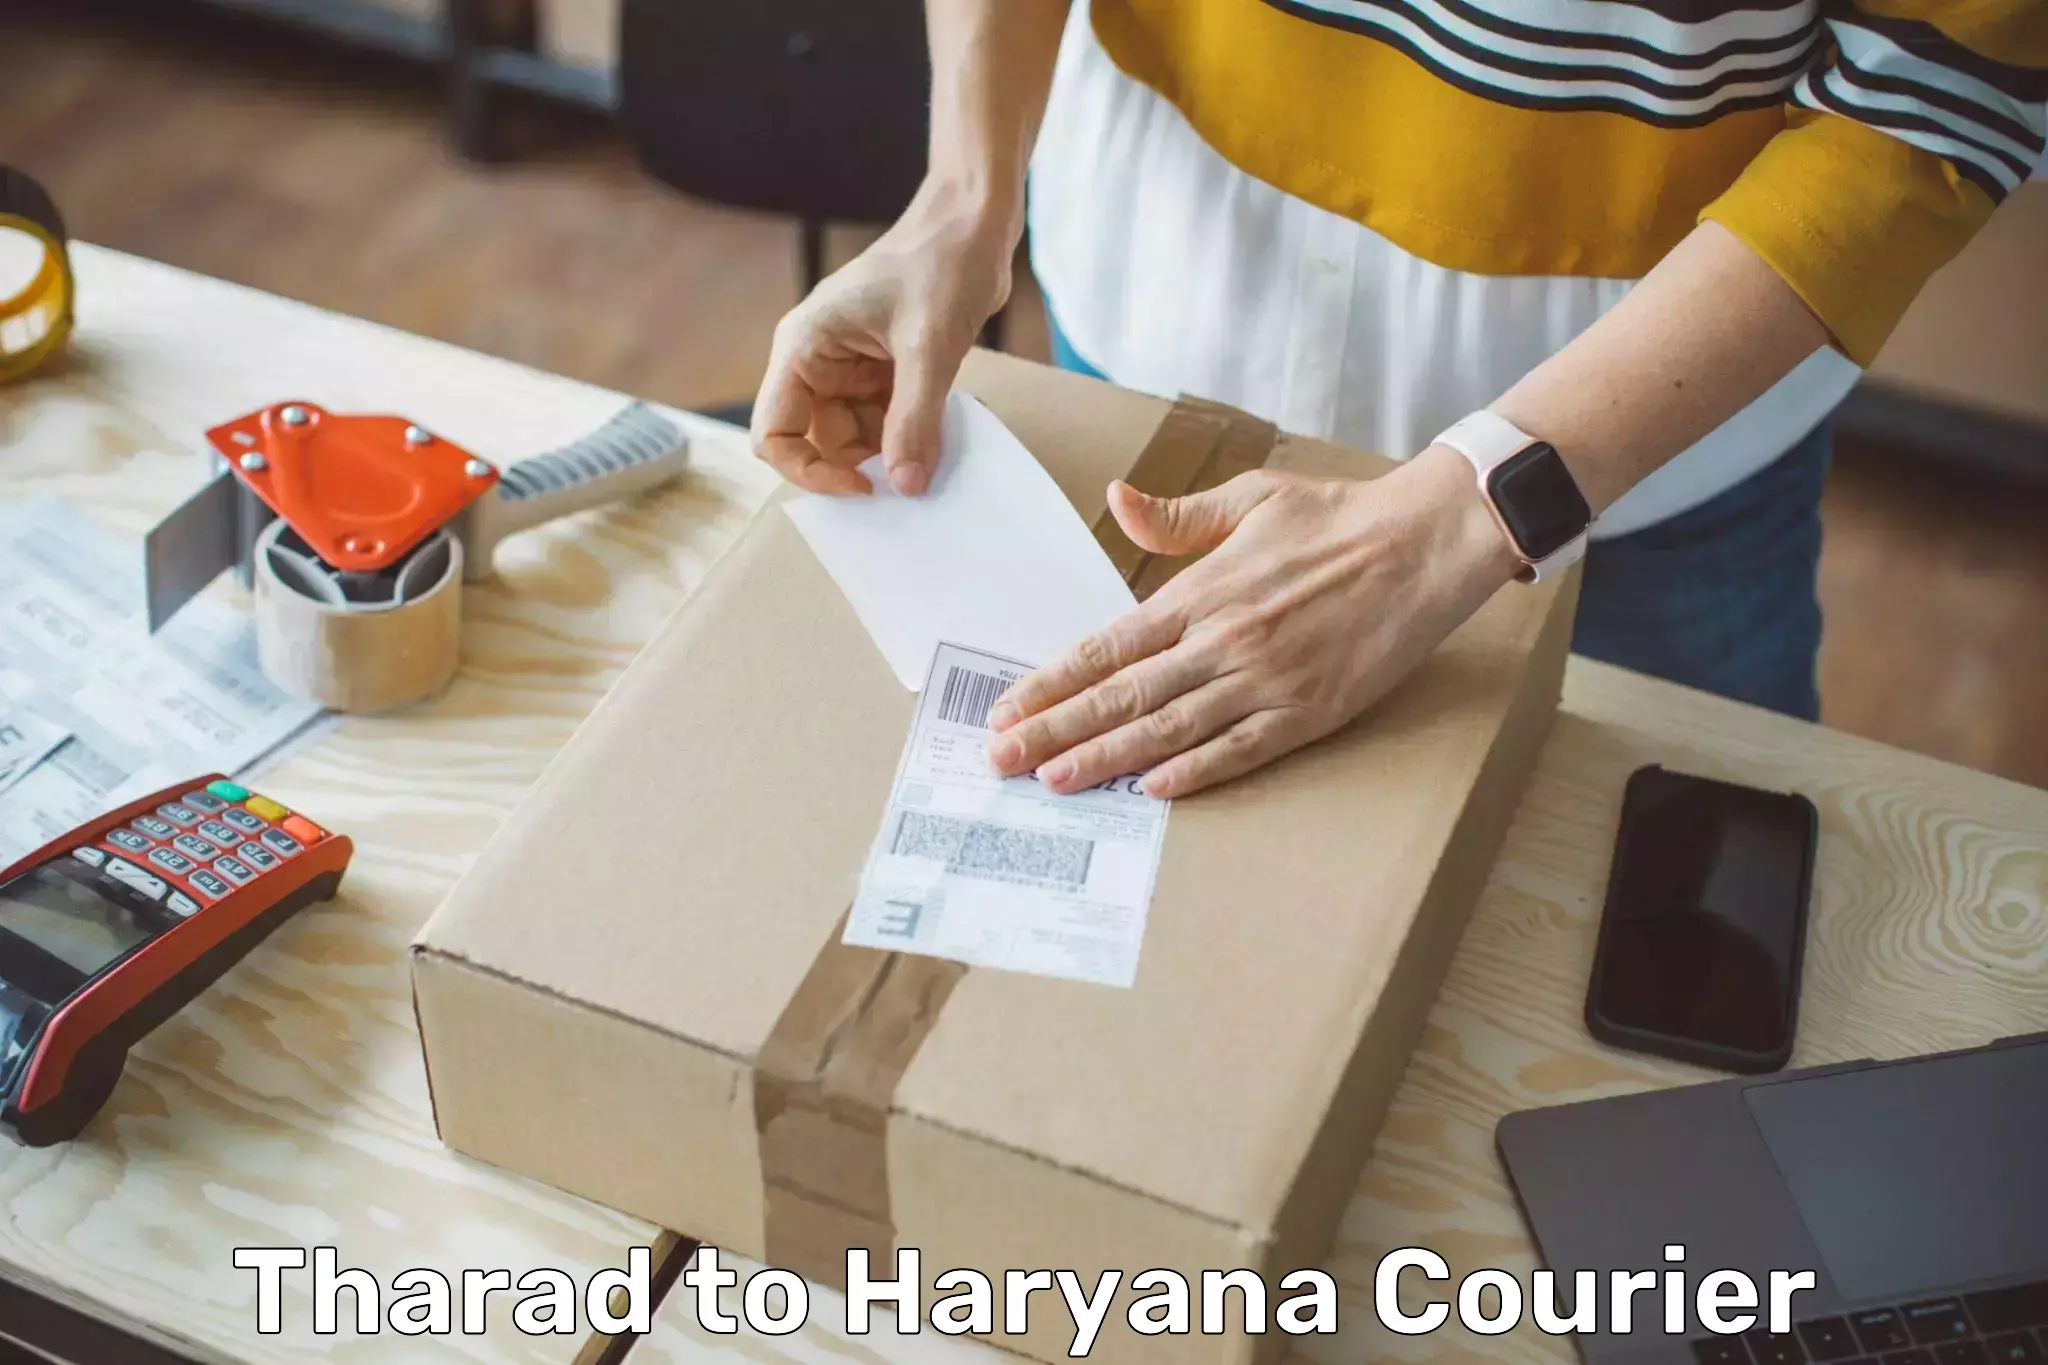 24-hour delivery options Tharad to Chirya